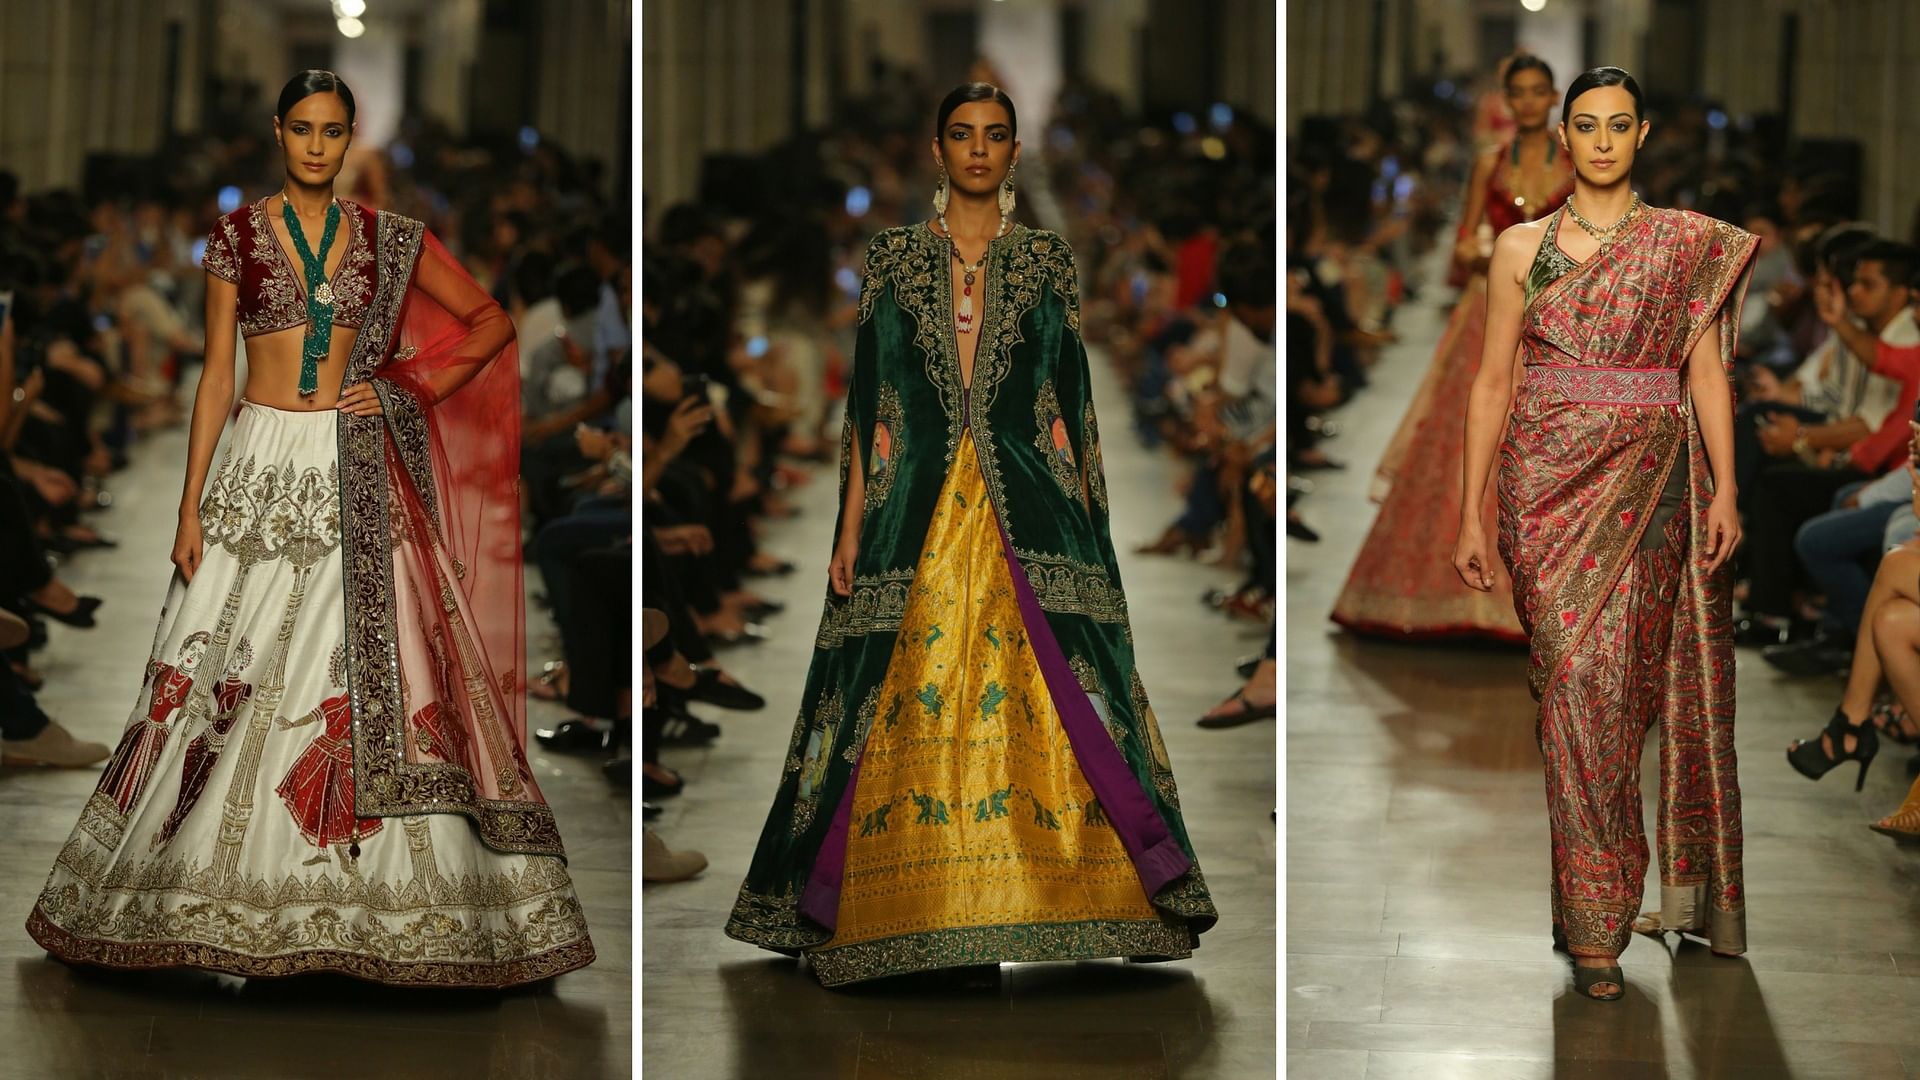 Couturier Manav Gangwani’s latest couture collection, ‘India @ 70’ was showcased at FDCI India Couture Week 2017.